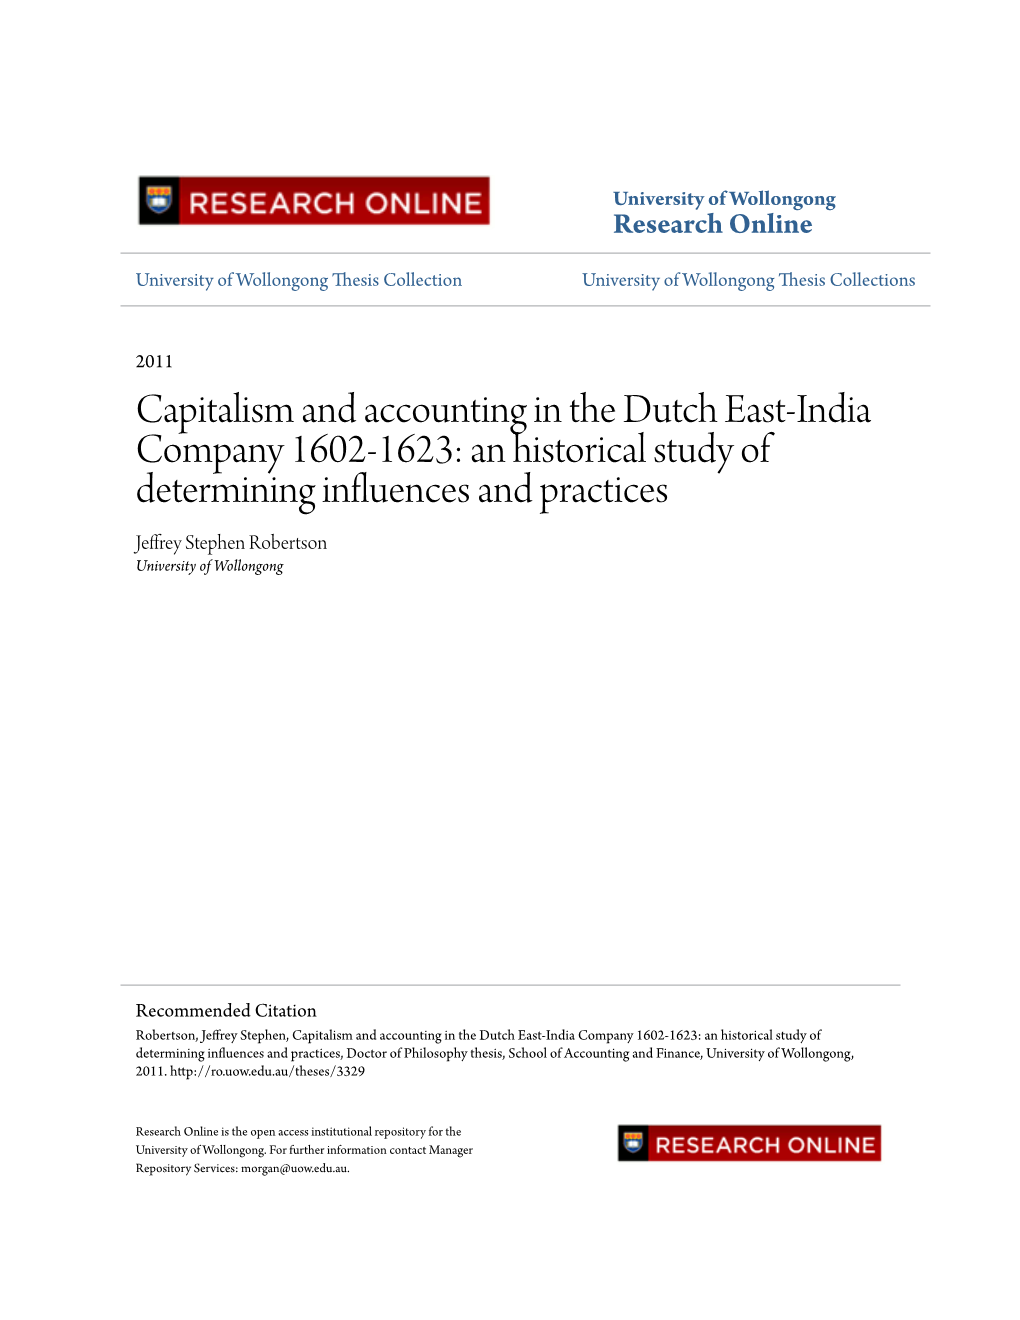 Capitalism and Accounting in the Dutch East-India